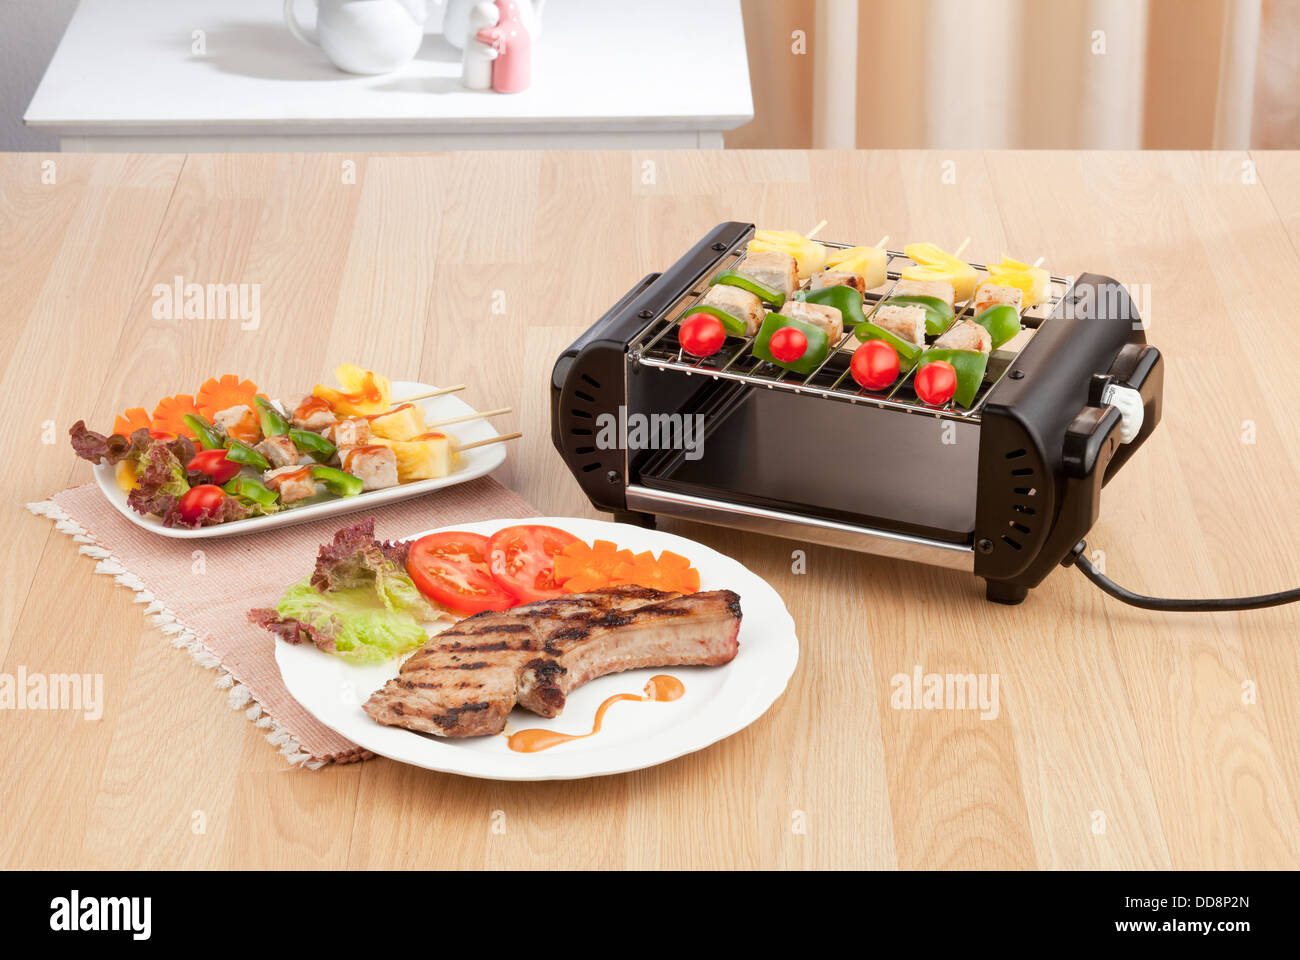 https://c8.alamy.com/comp/DD8P2N/electric-grill-stove-for-your-barbecue-or-steak-DD8P2N.jpg